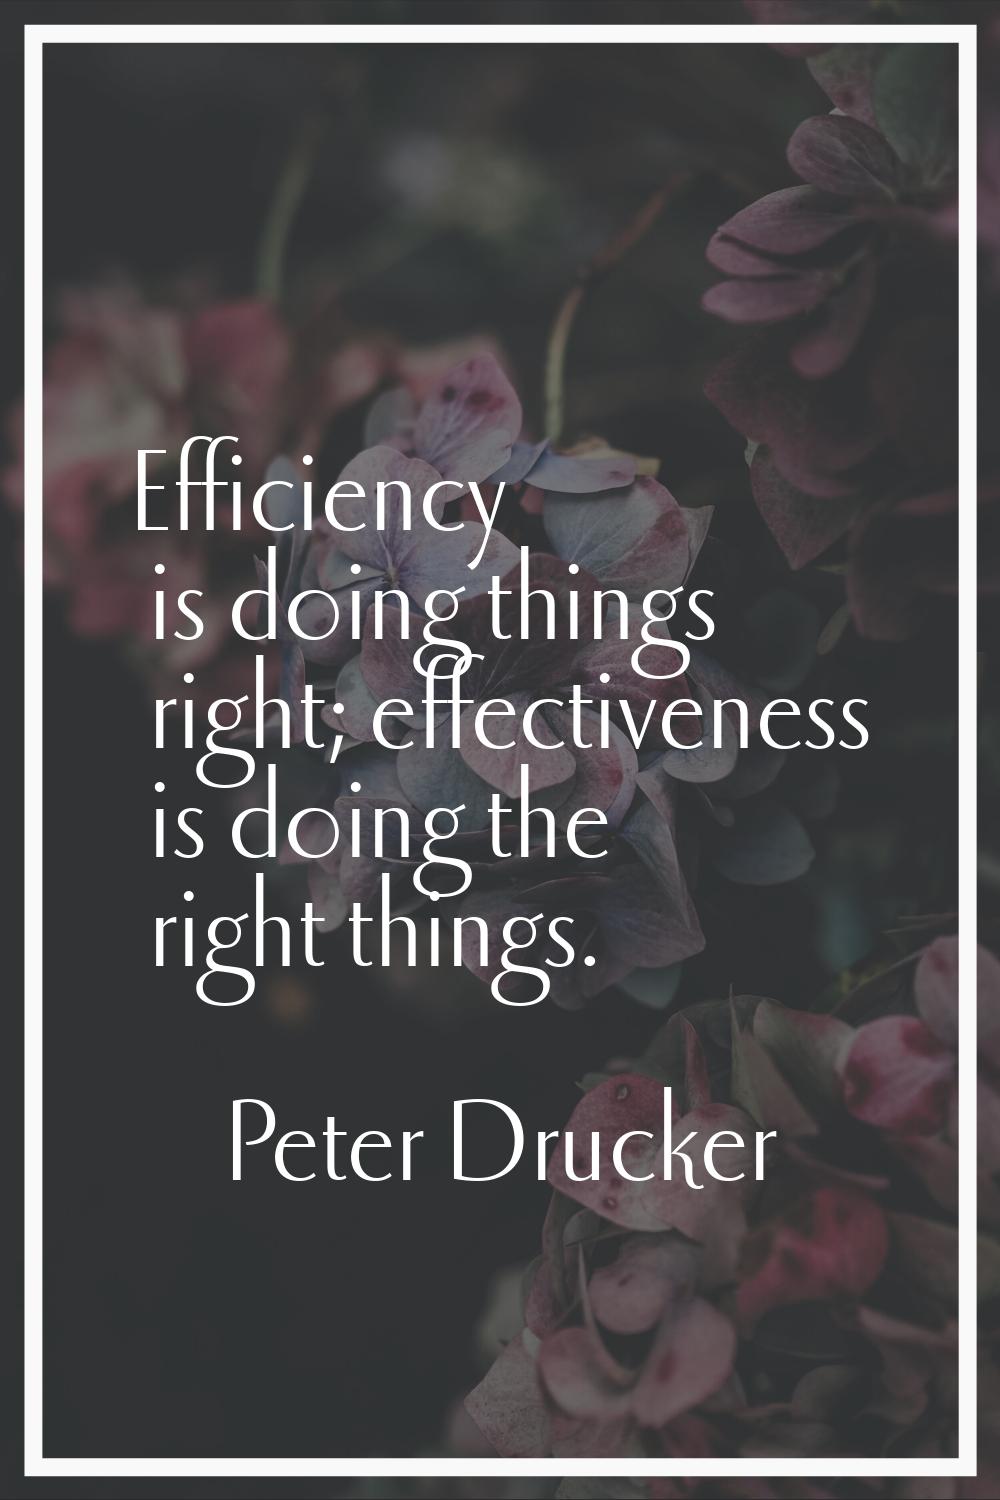 Efficiency is doing things right; effectiveness is doing the right things.